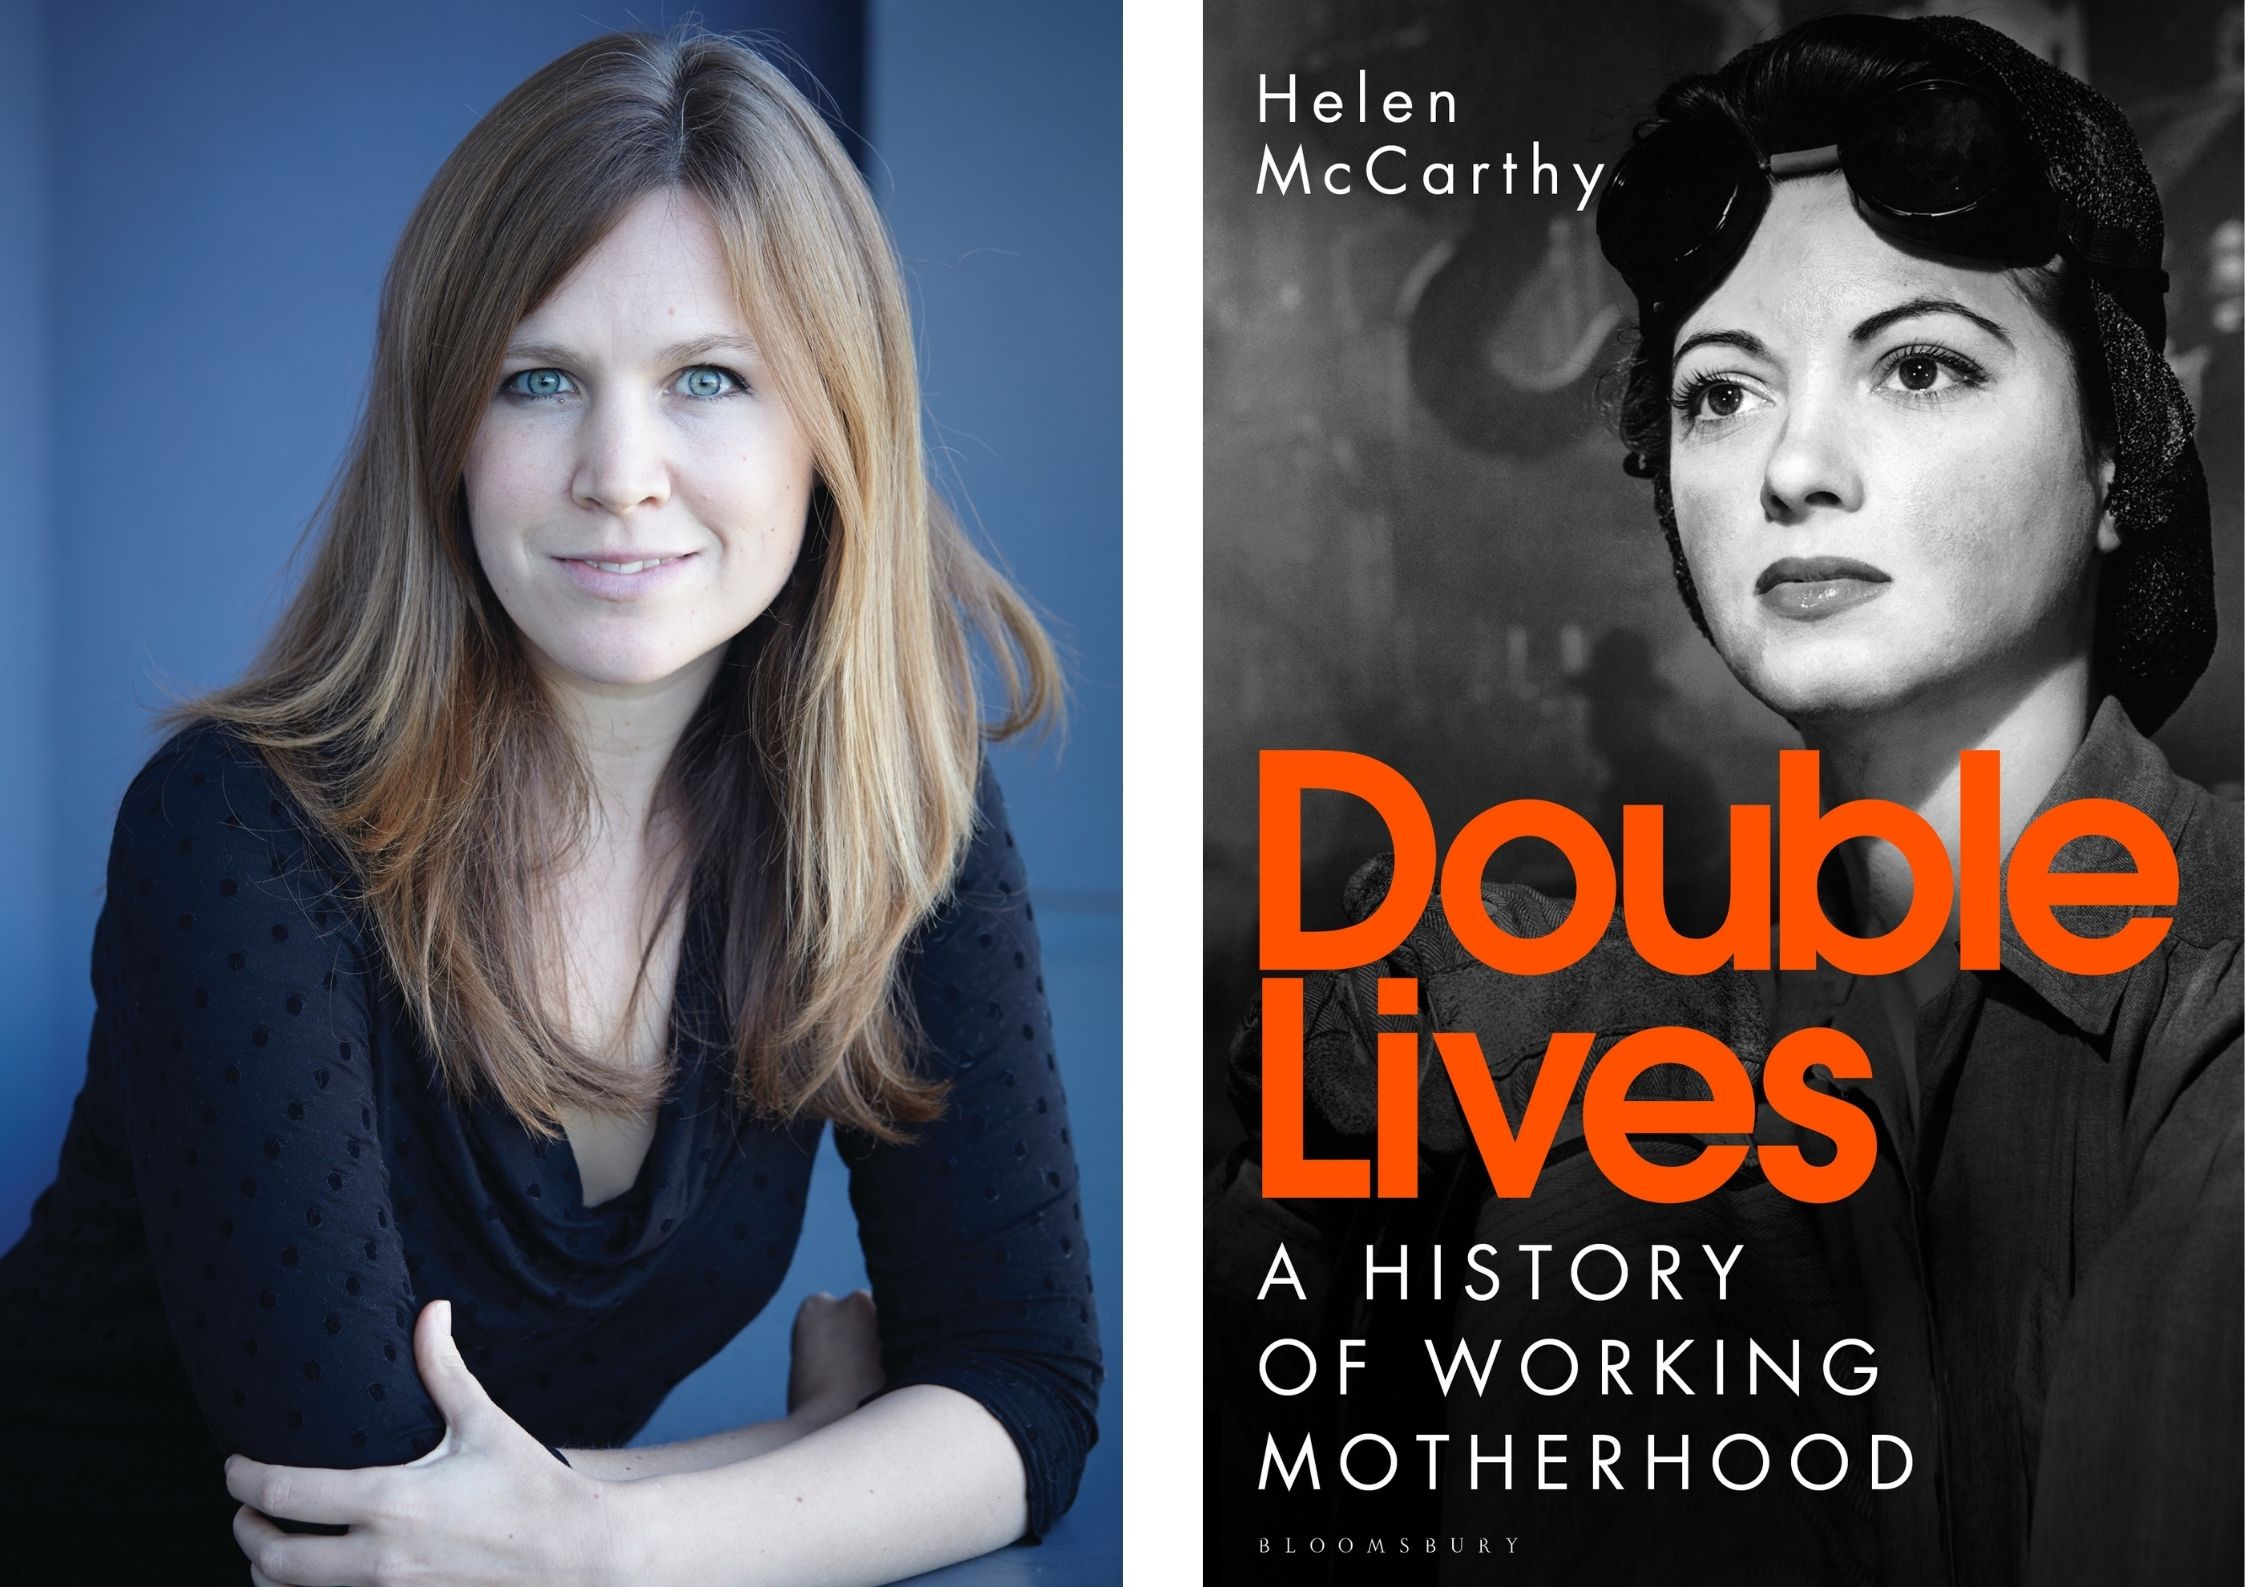 Helen McCarthy and her book cover, for Double Lives